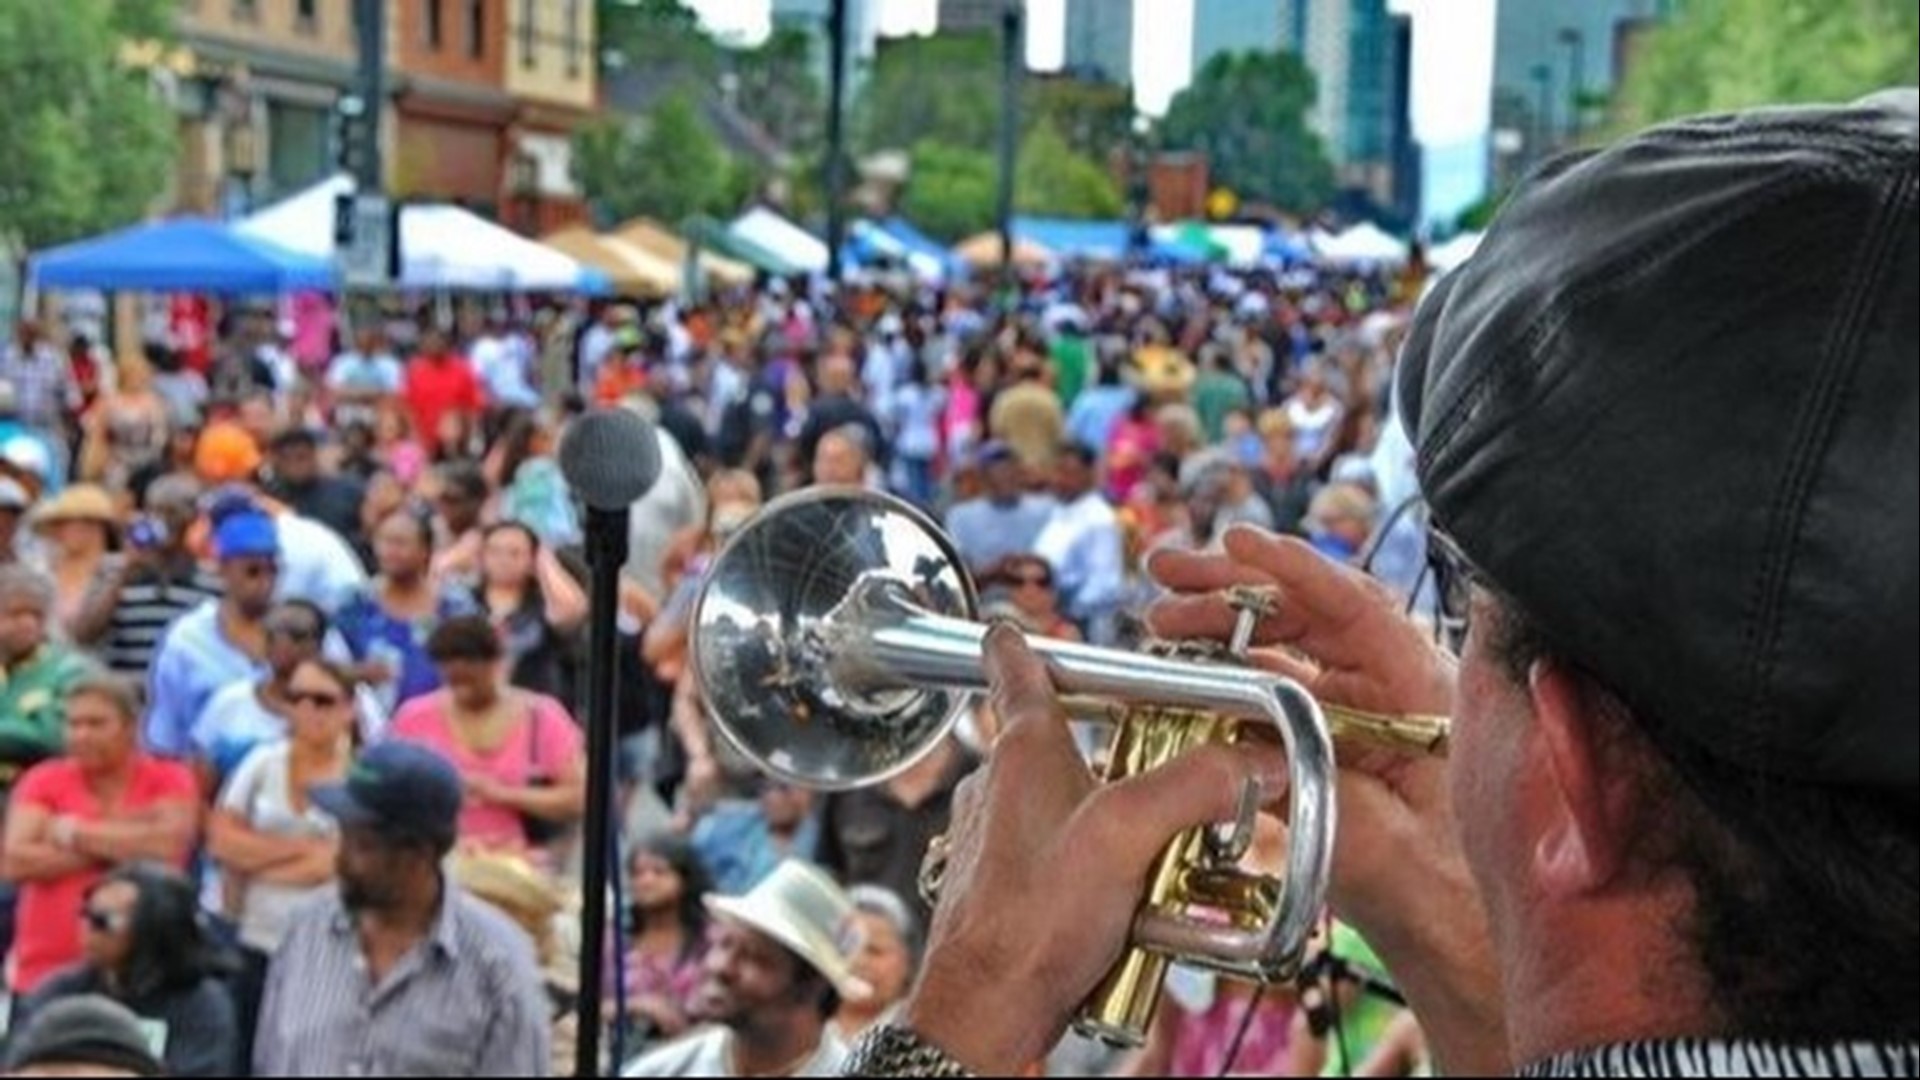 The Juneteenth Music Festival returns to Denver's Historic Five Points Neighborhood on Saturday and Sunday. The festival, located at 27th and Welton Street, will feature live music, a youth zone and hundreds of community vendors. Ro James is Saturday’s headliner and Sunday will see Grammy Award-winner Ashanti take the stage at 7 p.m. Check out the complete event schedule at JuneteethMusicFestival.com.